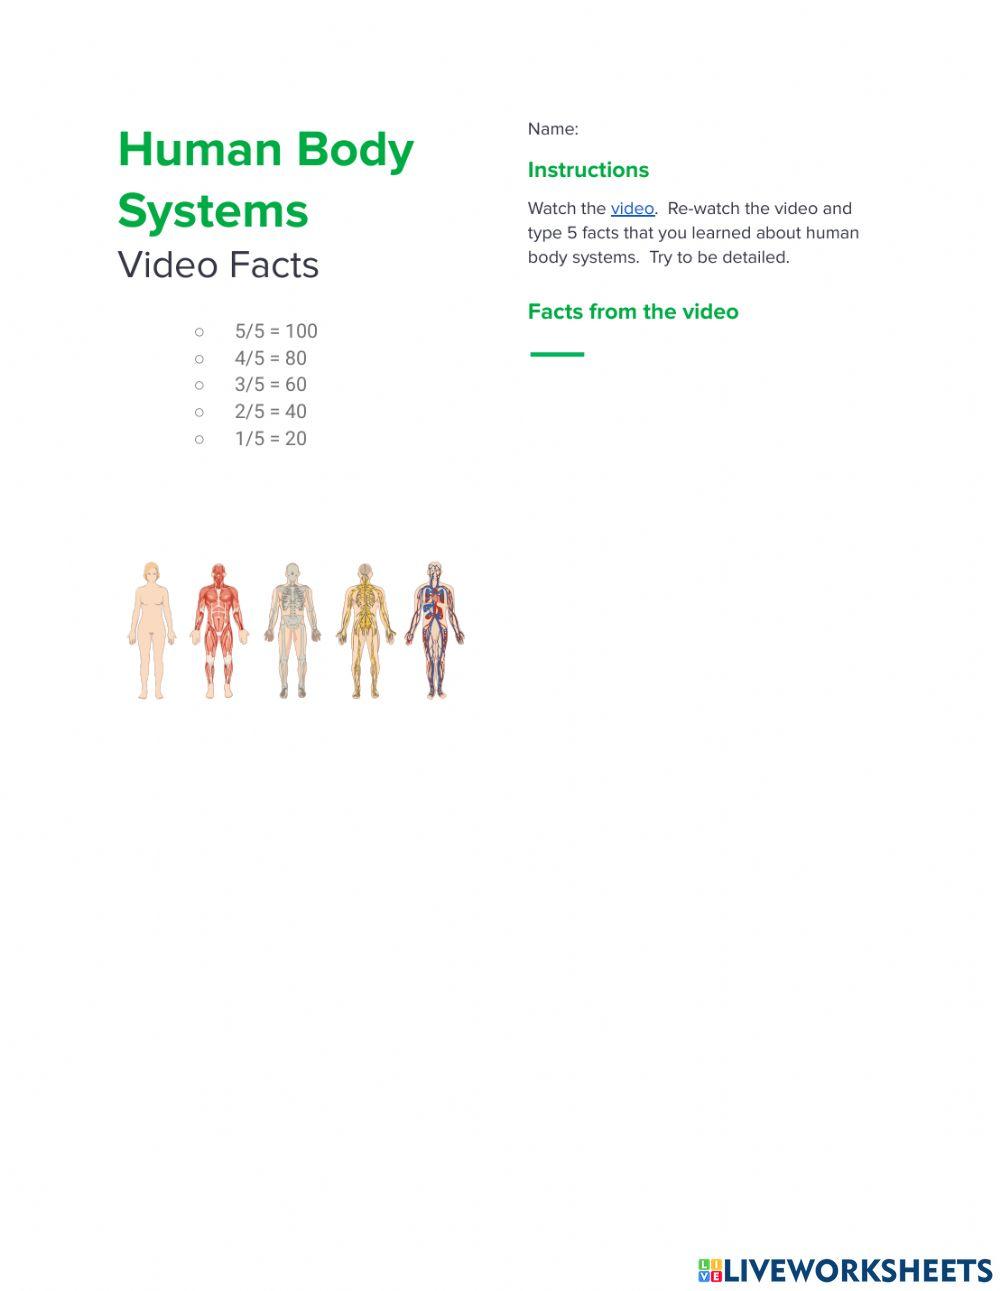 Human Body Systems Video Facts